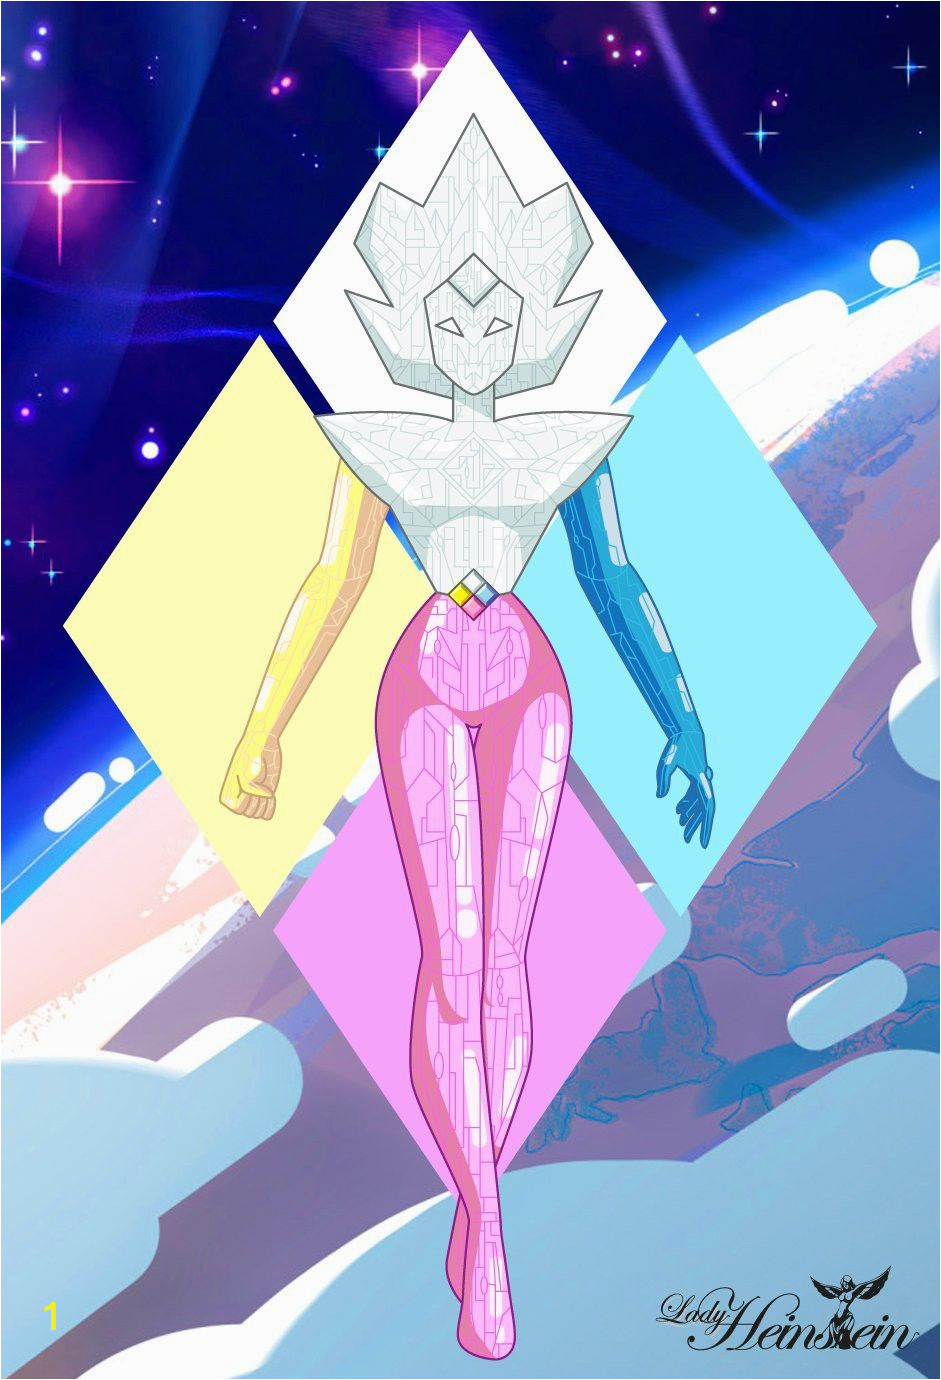 Steven Universe Wall Mural All 4 Diamonds to Her